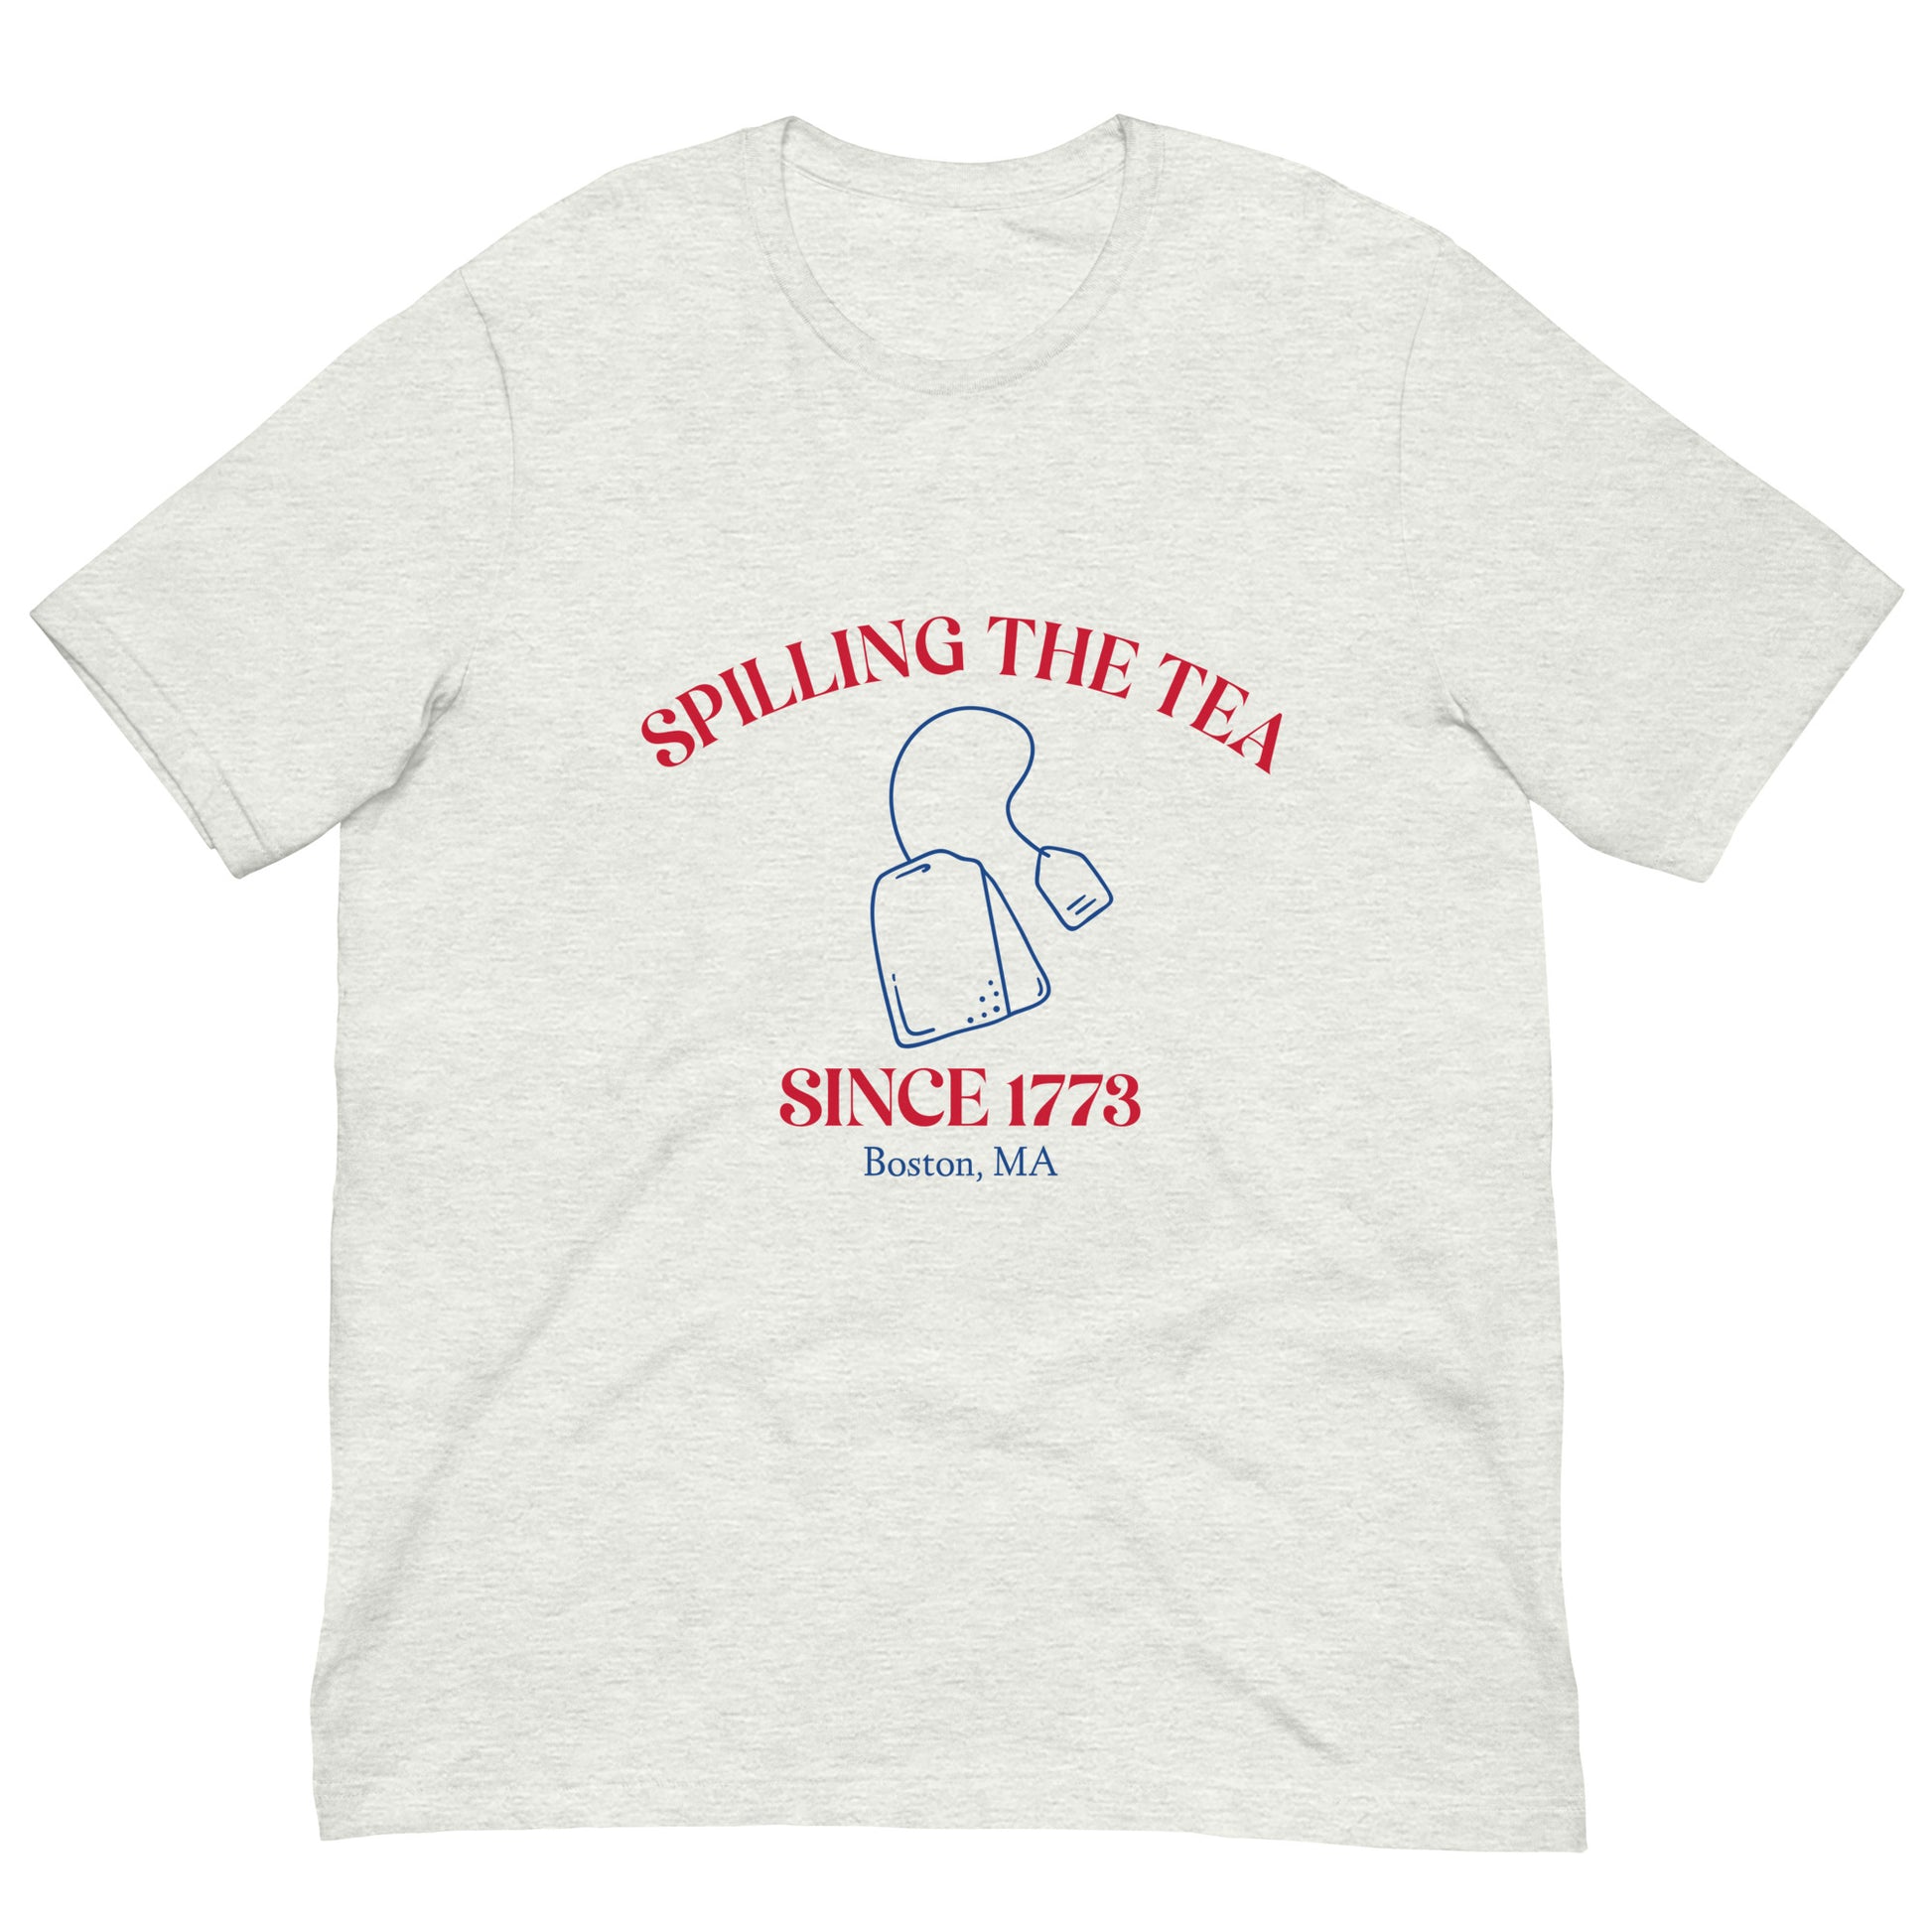 light grey tshirt that say "spilling the tea since 1773" in red lettering and "Boston MA" in blue lettering with tea bag graphic in middle